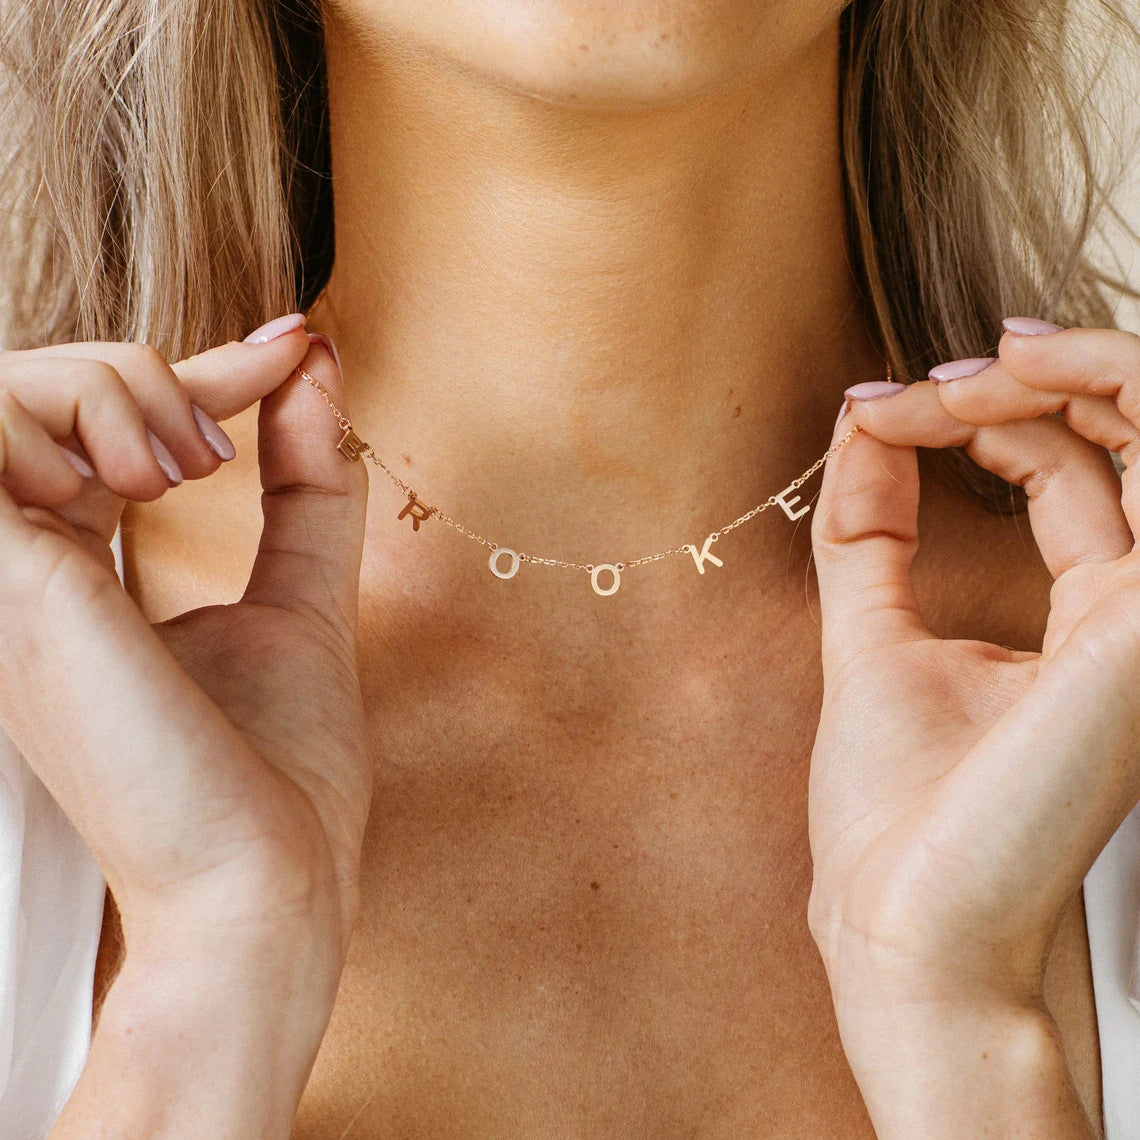 A woman holding the Amara letter necklace gold with letters B R O O K E.